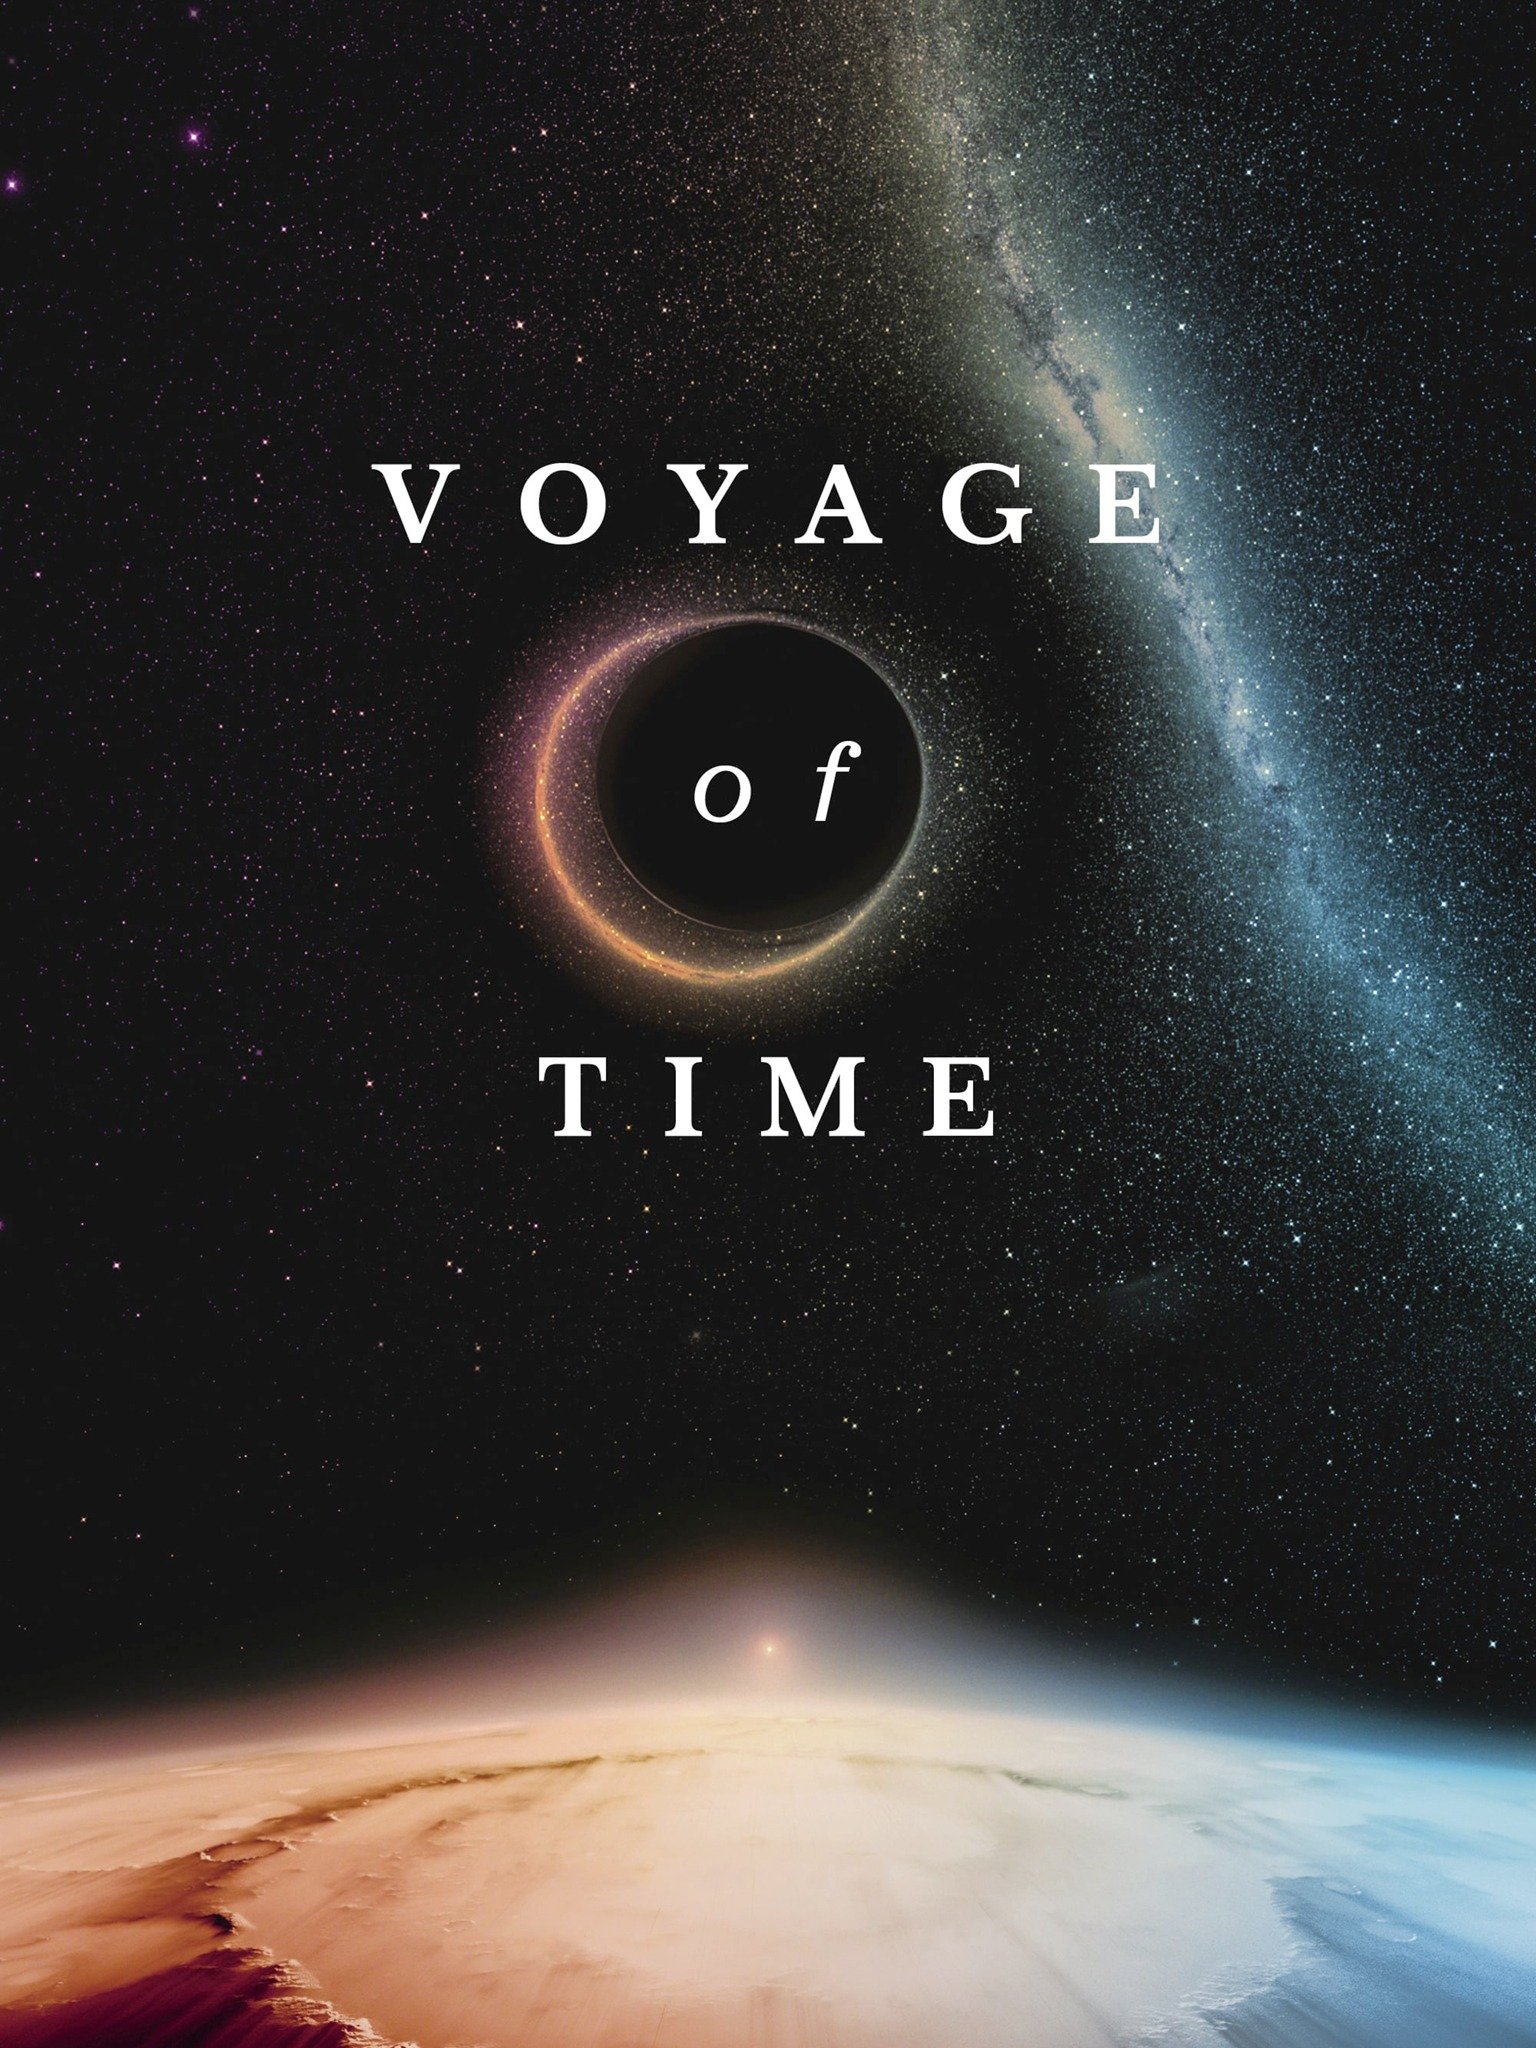 voyage of time full movie watch online